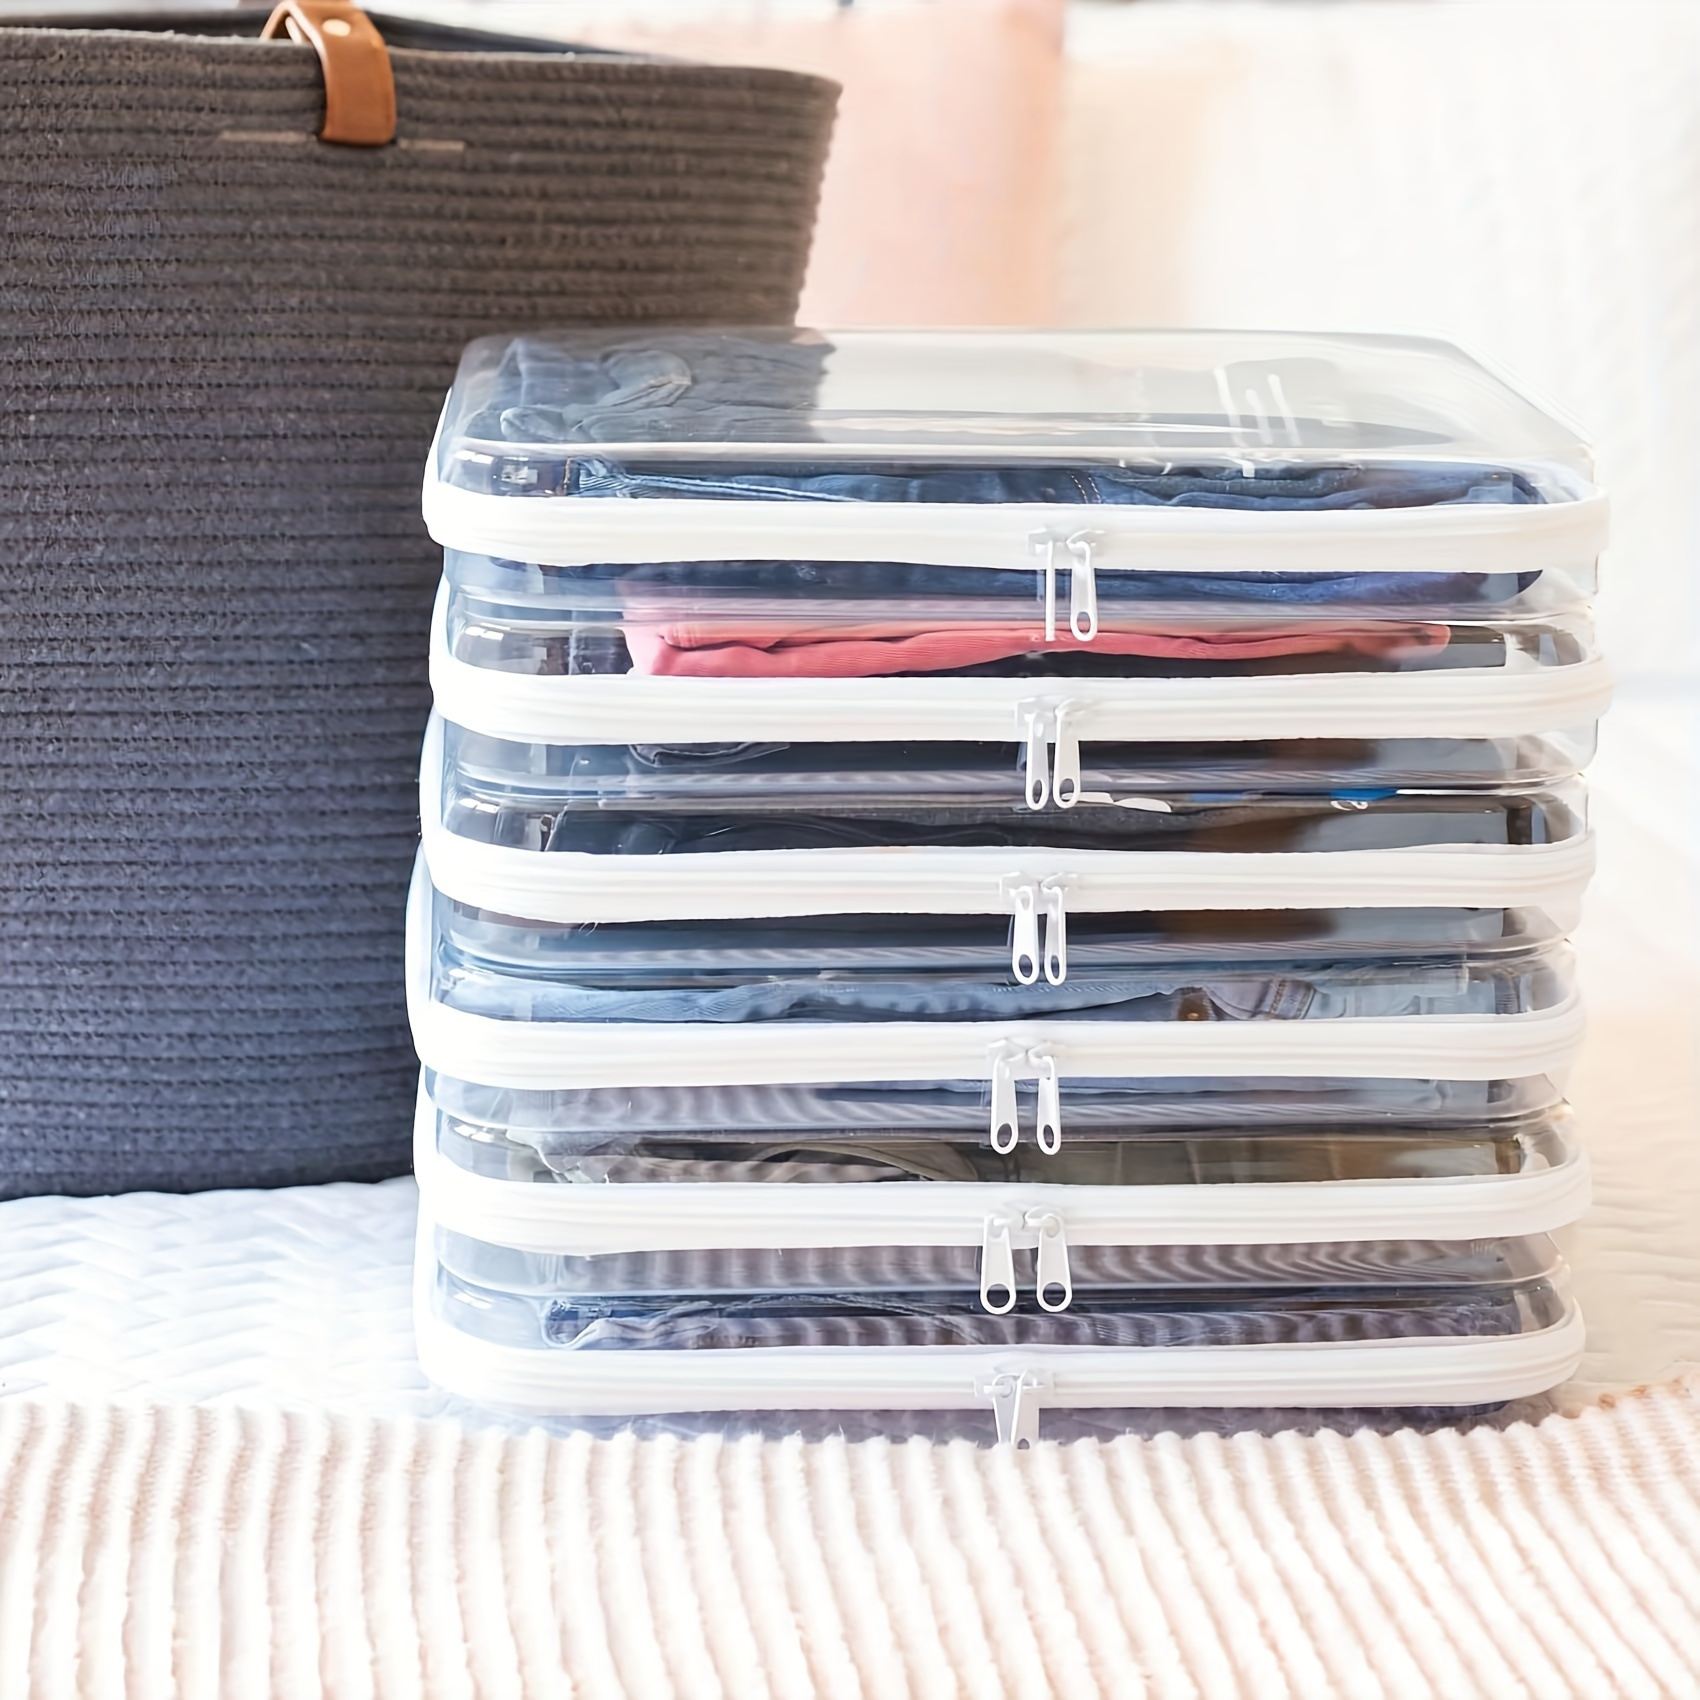 

Zippered, Durable, Multi-purpose Travel Storage Bags For Snacks & Essentials: 2-pack Glamanizer Clear Plastic Handbag Organizers - Perfect For Organizing Your Snacks And Essentials On The Go